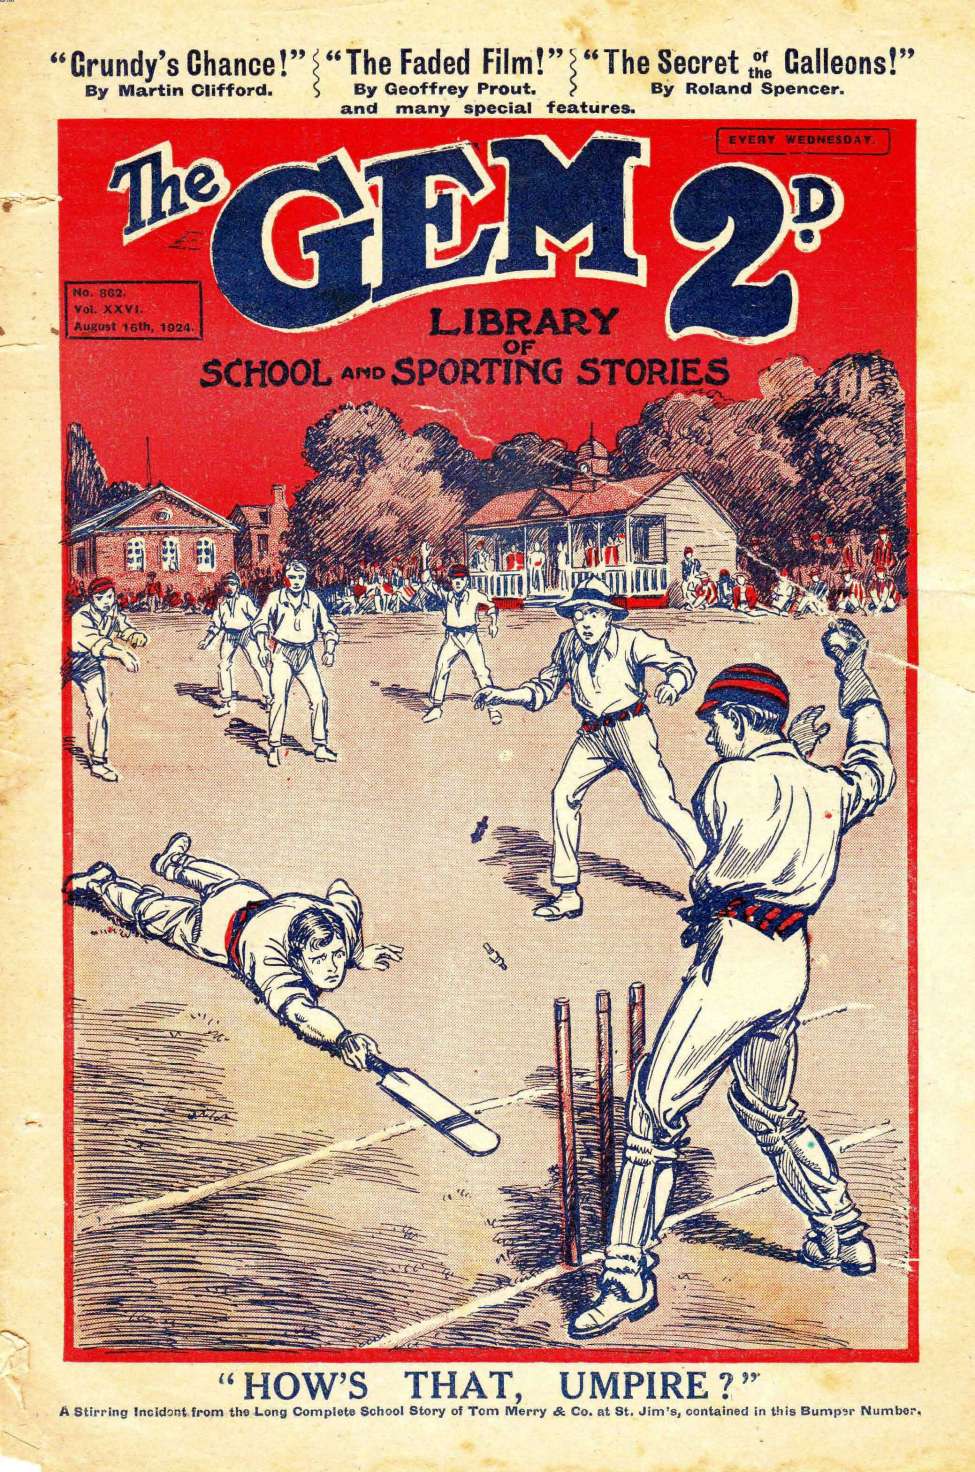 Book Cover For The Gem v2 862 - Grundy’s Chance